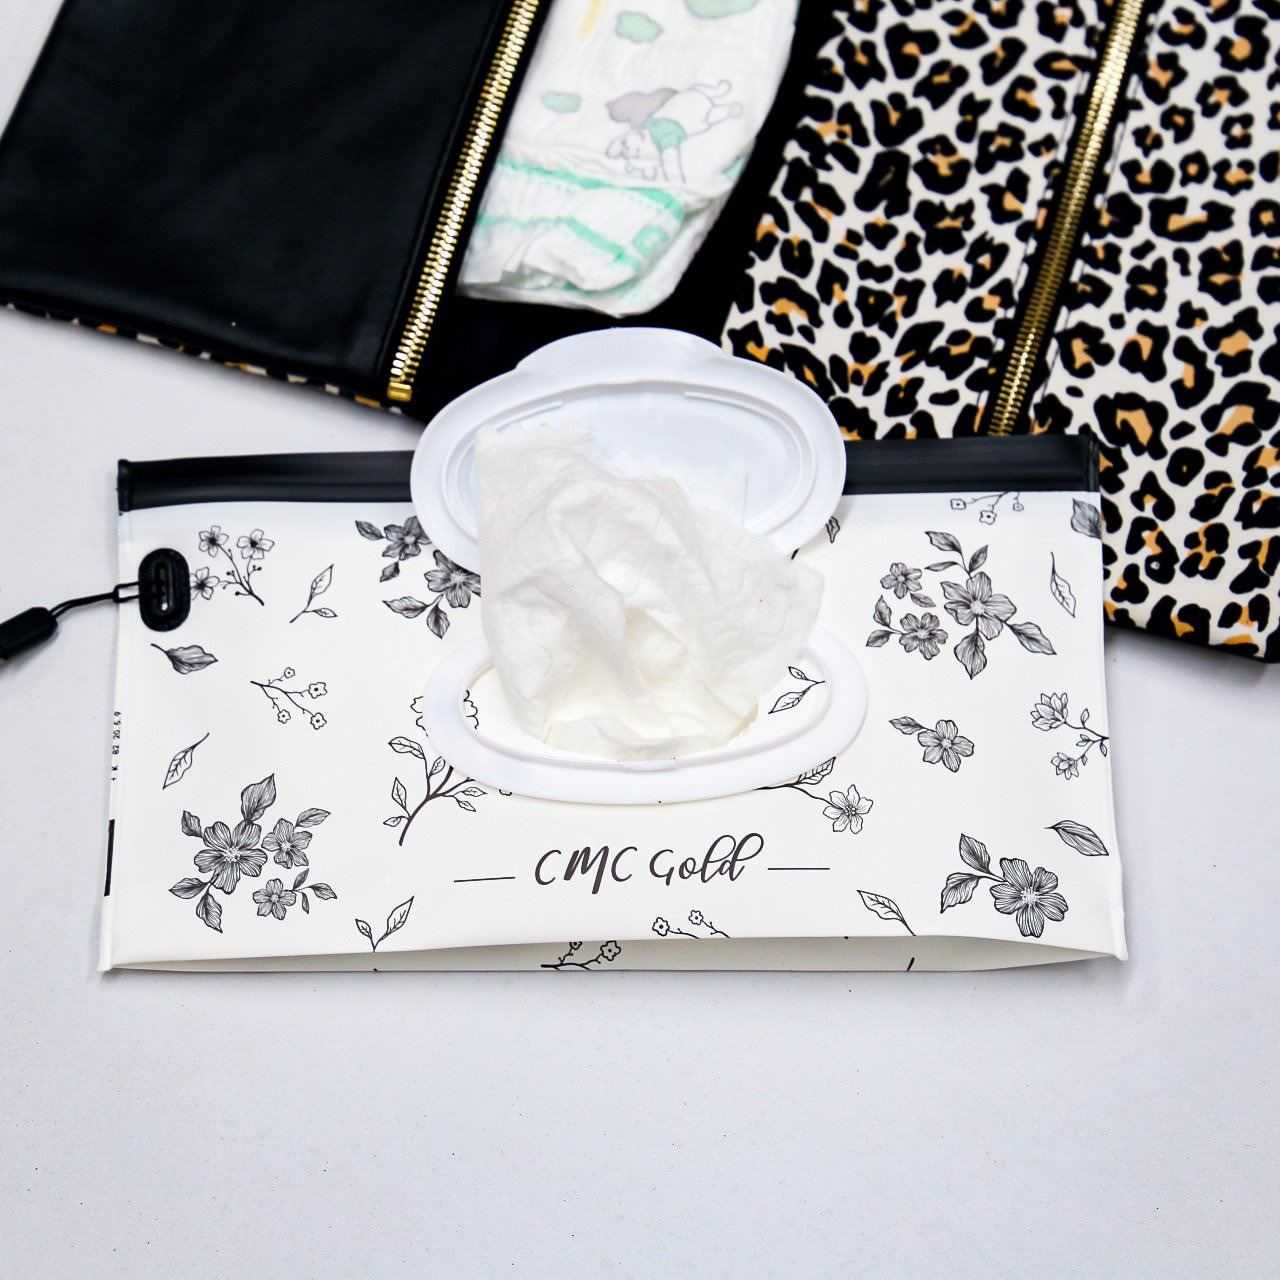 CMC Gold Travel Wipes Case